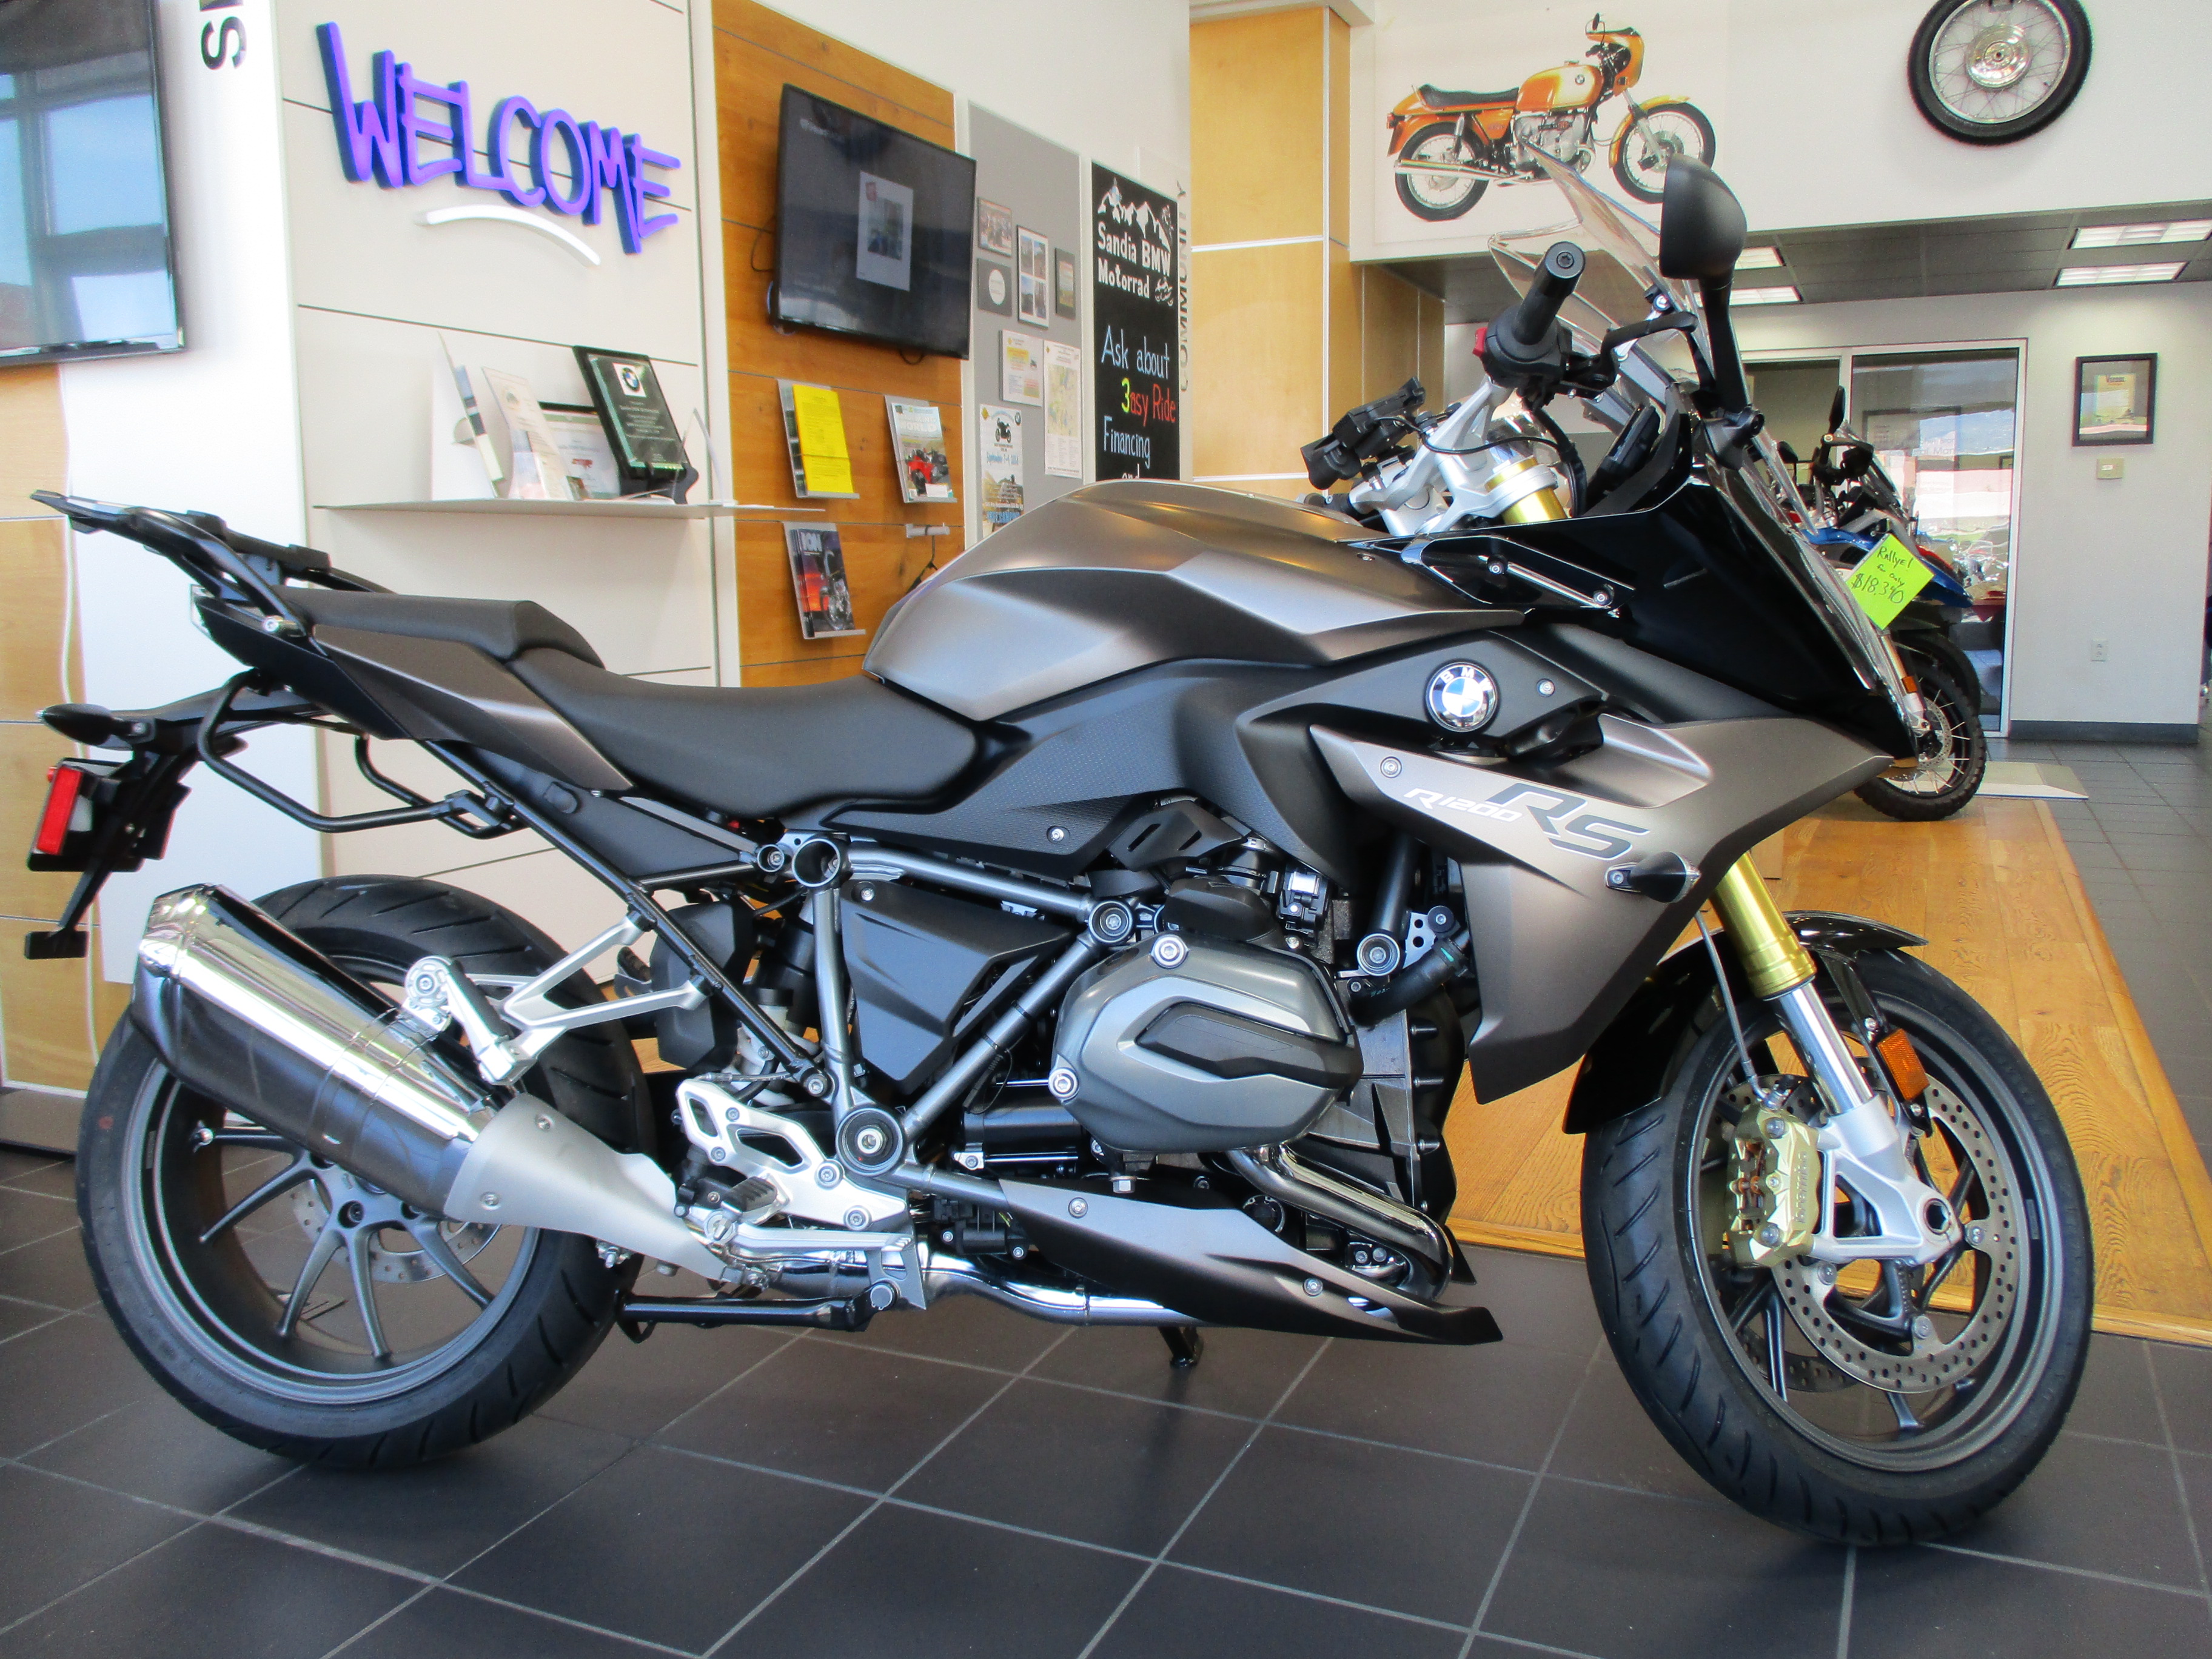 New Motorcycle Inventory - R1200RS - Sandia BMW Motorcycles - Albuquerque, NM.